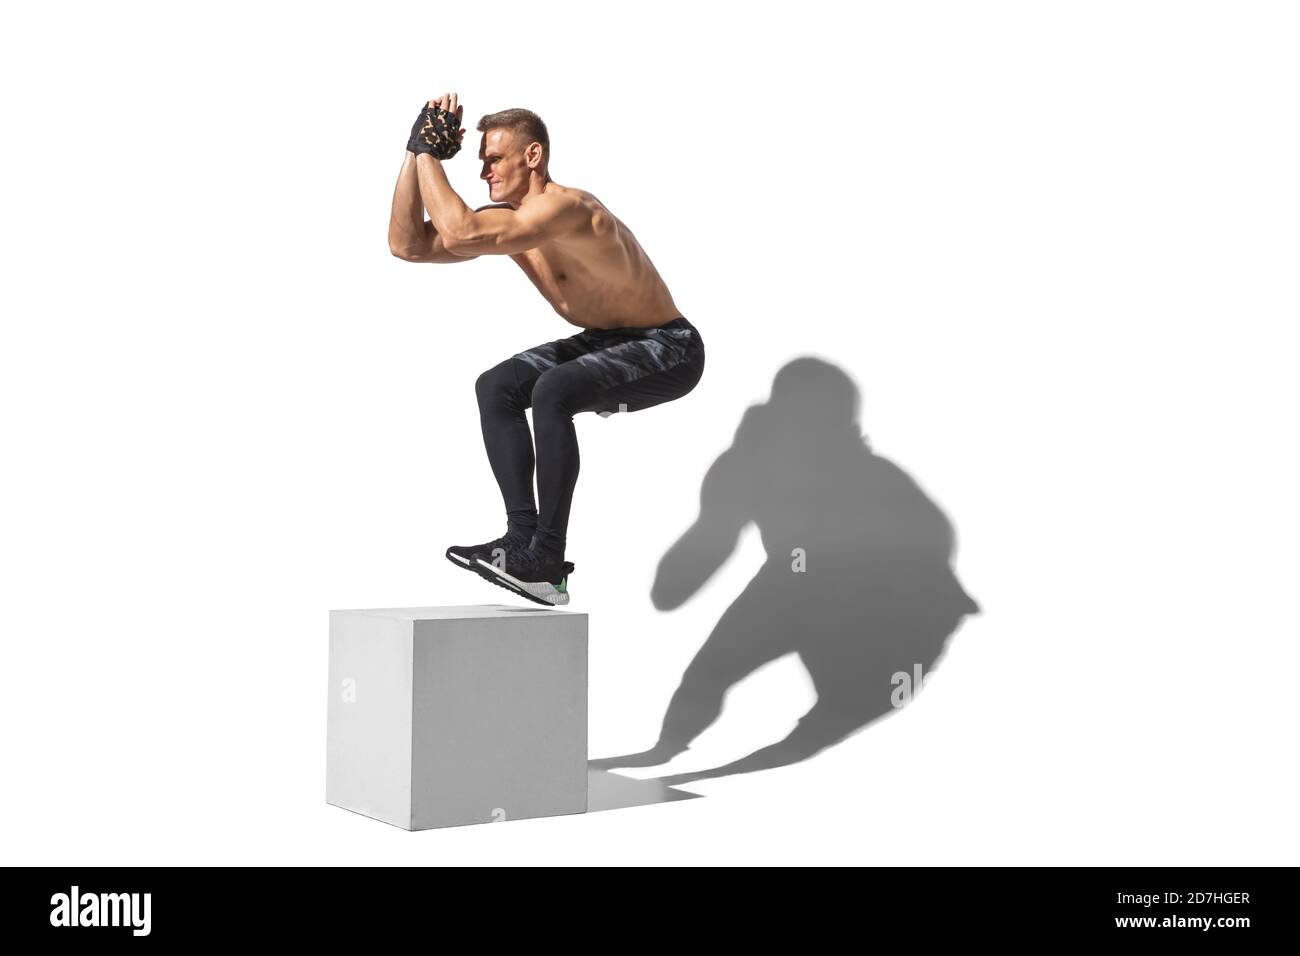 Activity, jumpbox. Stylish young male athlete on white studio background, portrait with shadows. Sportive fit model in motion and action. Body building, healthy lifestyle, style concept. Stock Photo